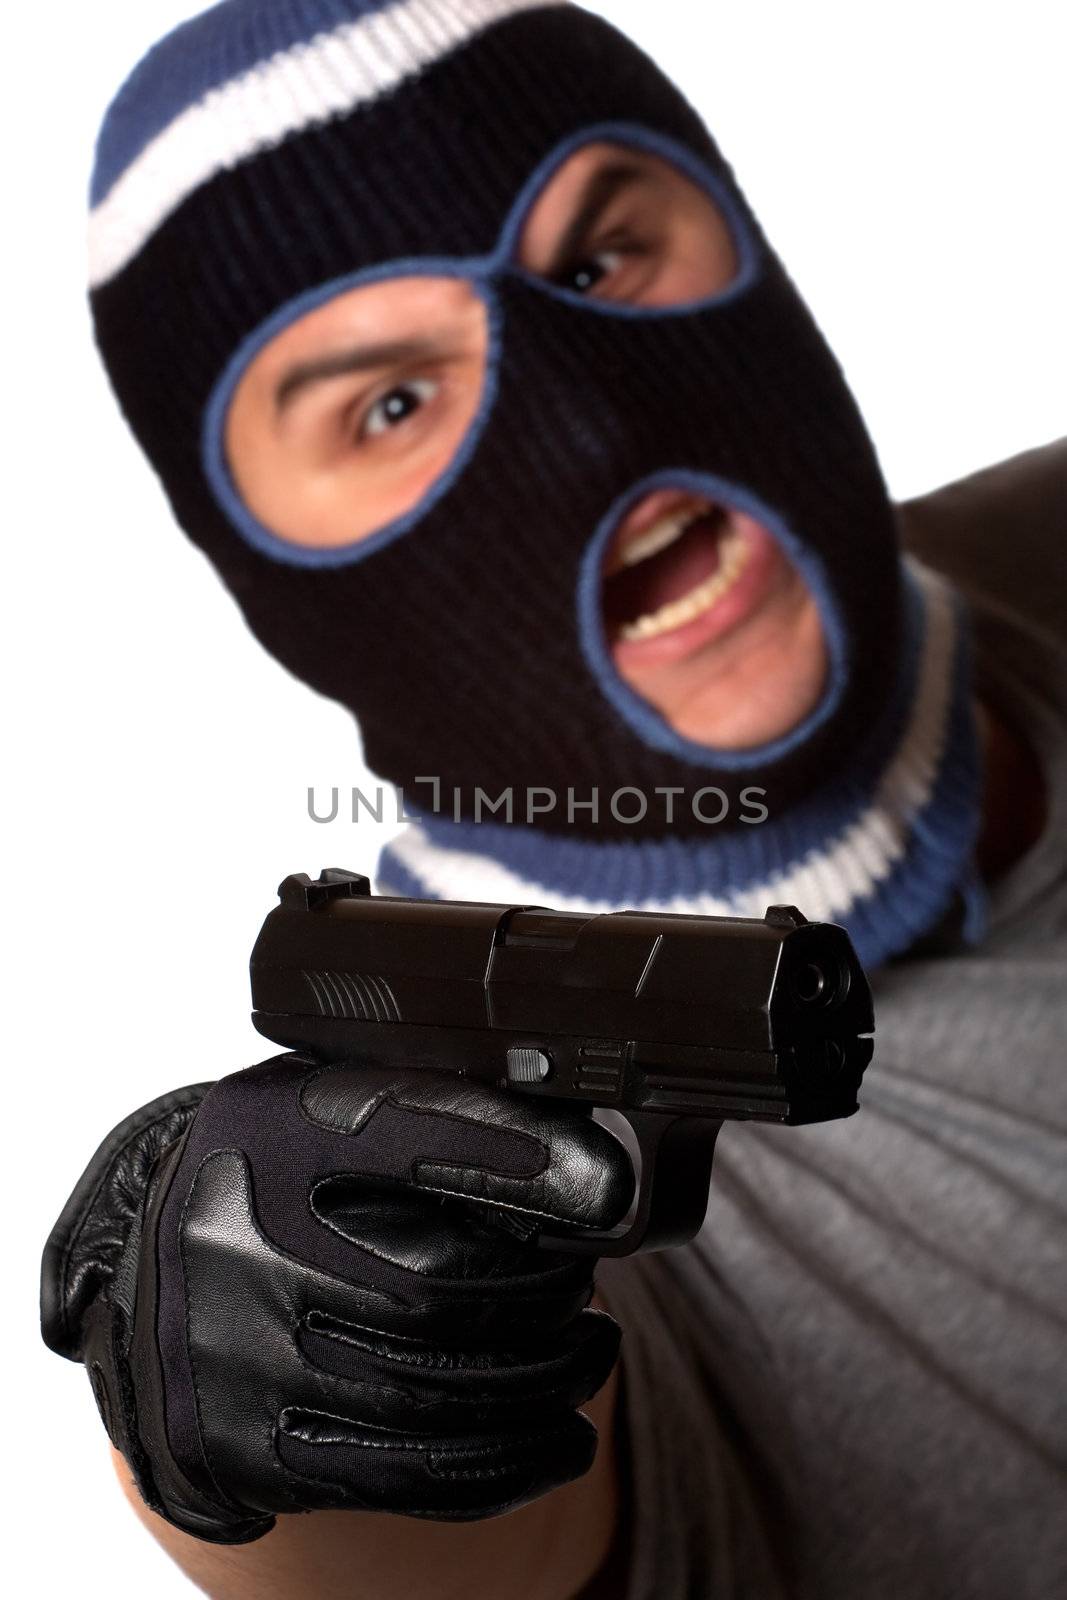 An angry looking man wearing a ski mask pointing a black handgun at the viewer. Shallow depth of field with sharpest focus on the gun.